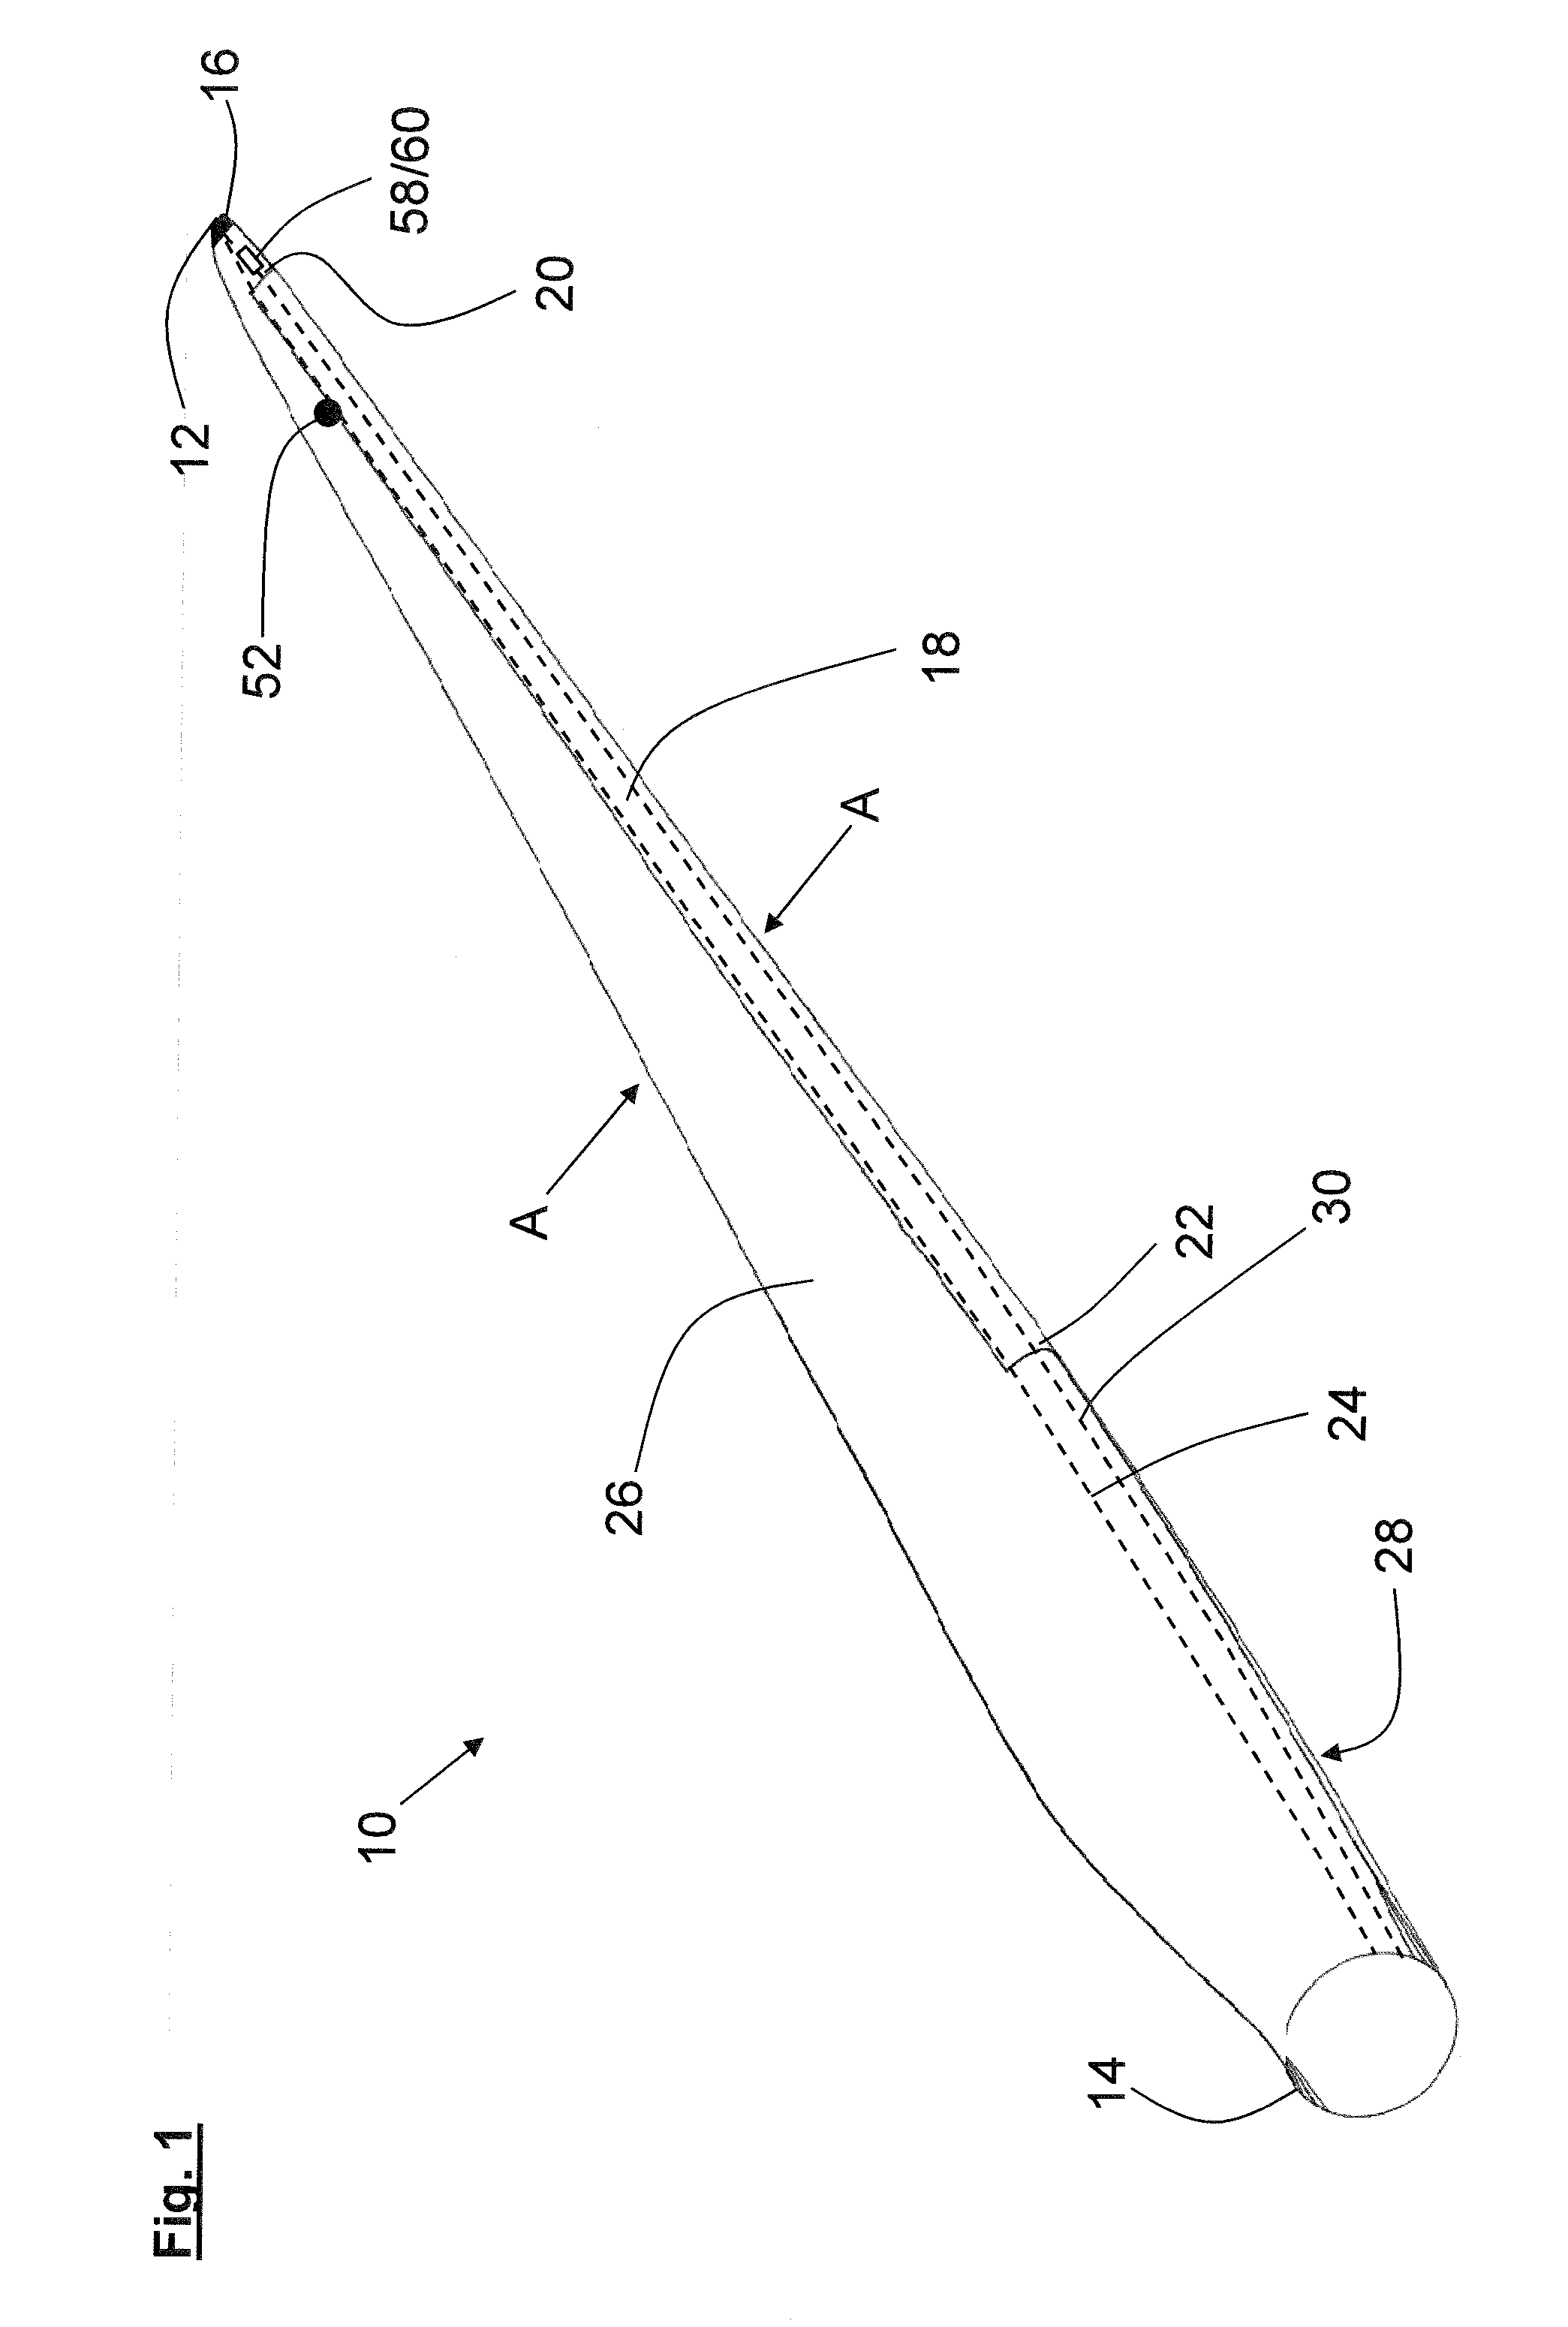 Wind turbine rotor blade having an electrical heating device and a plurality of lightning conductors